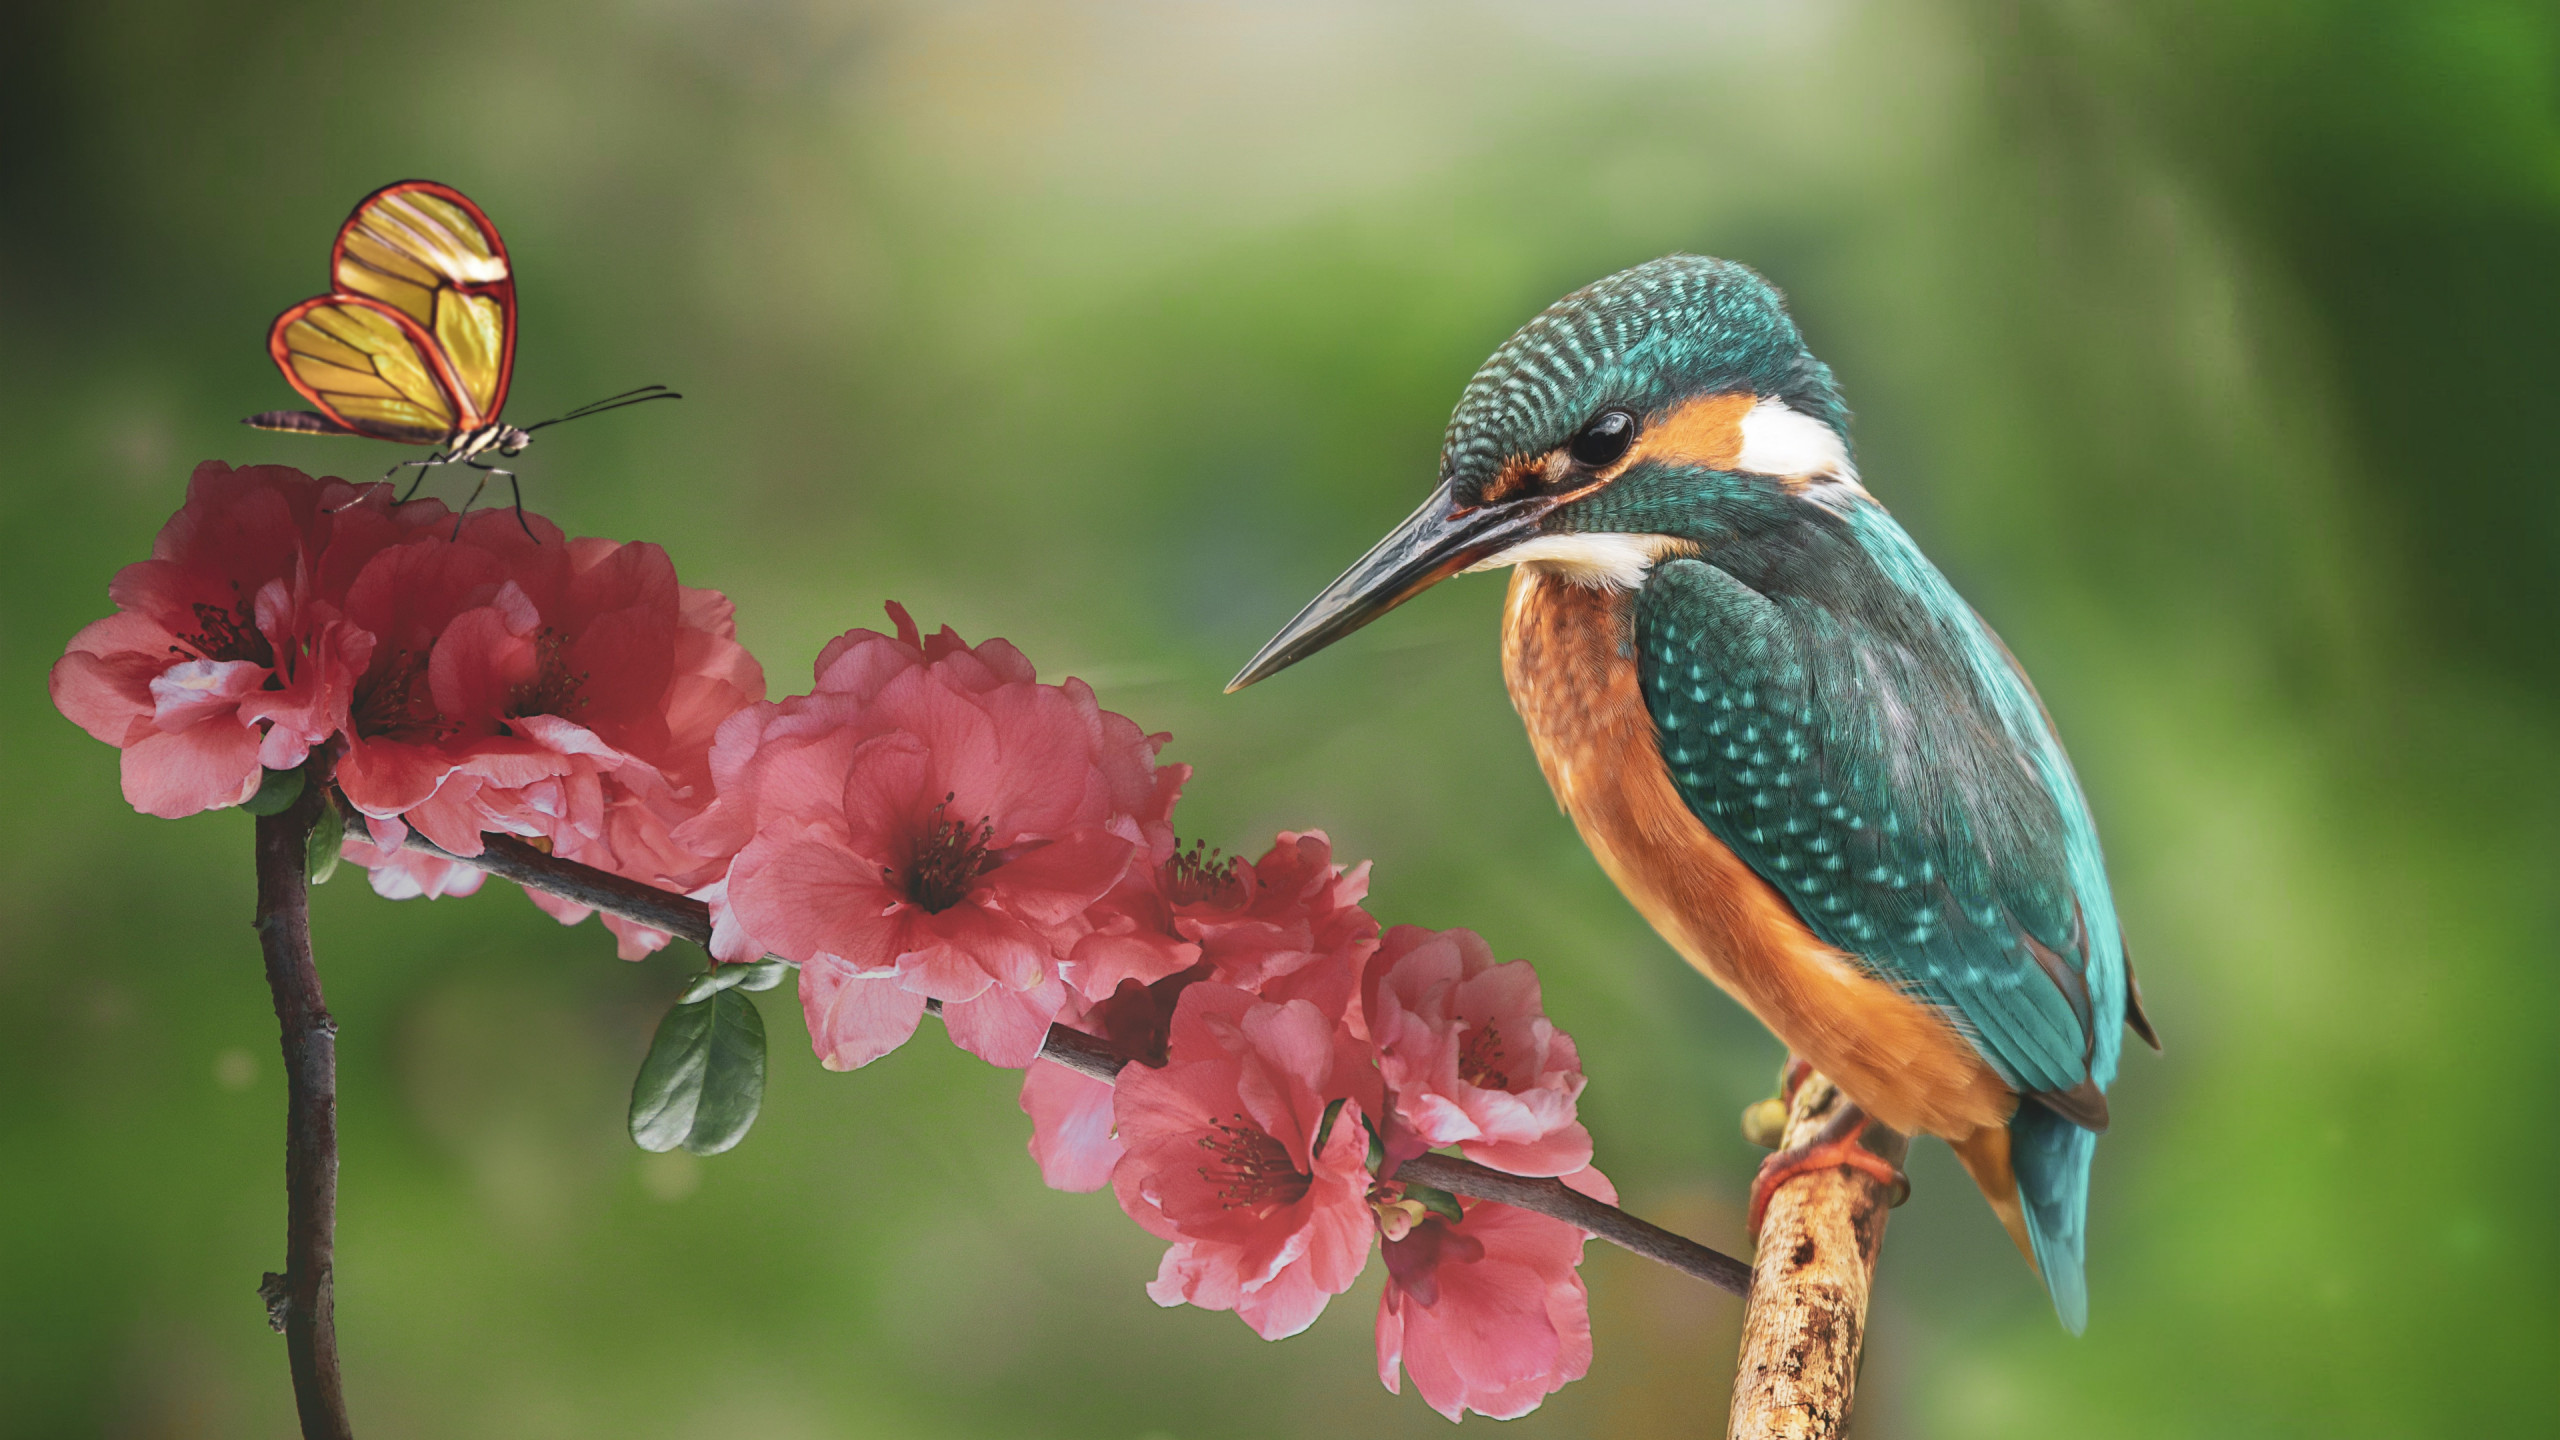 Kingfisher and the butterfly wallpaper 2560x1440